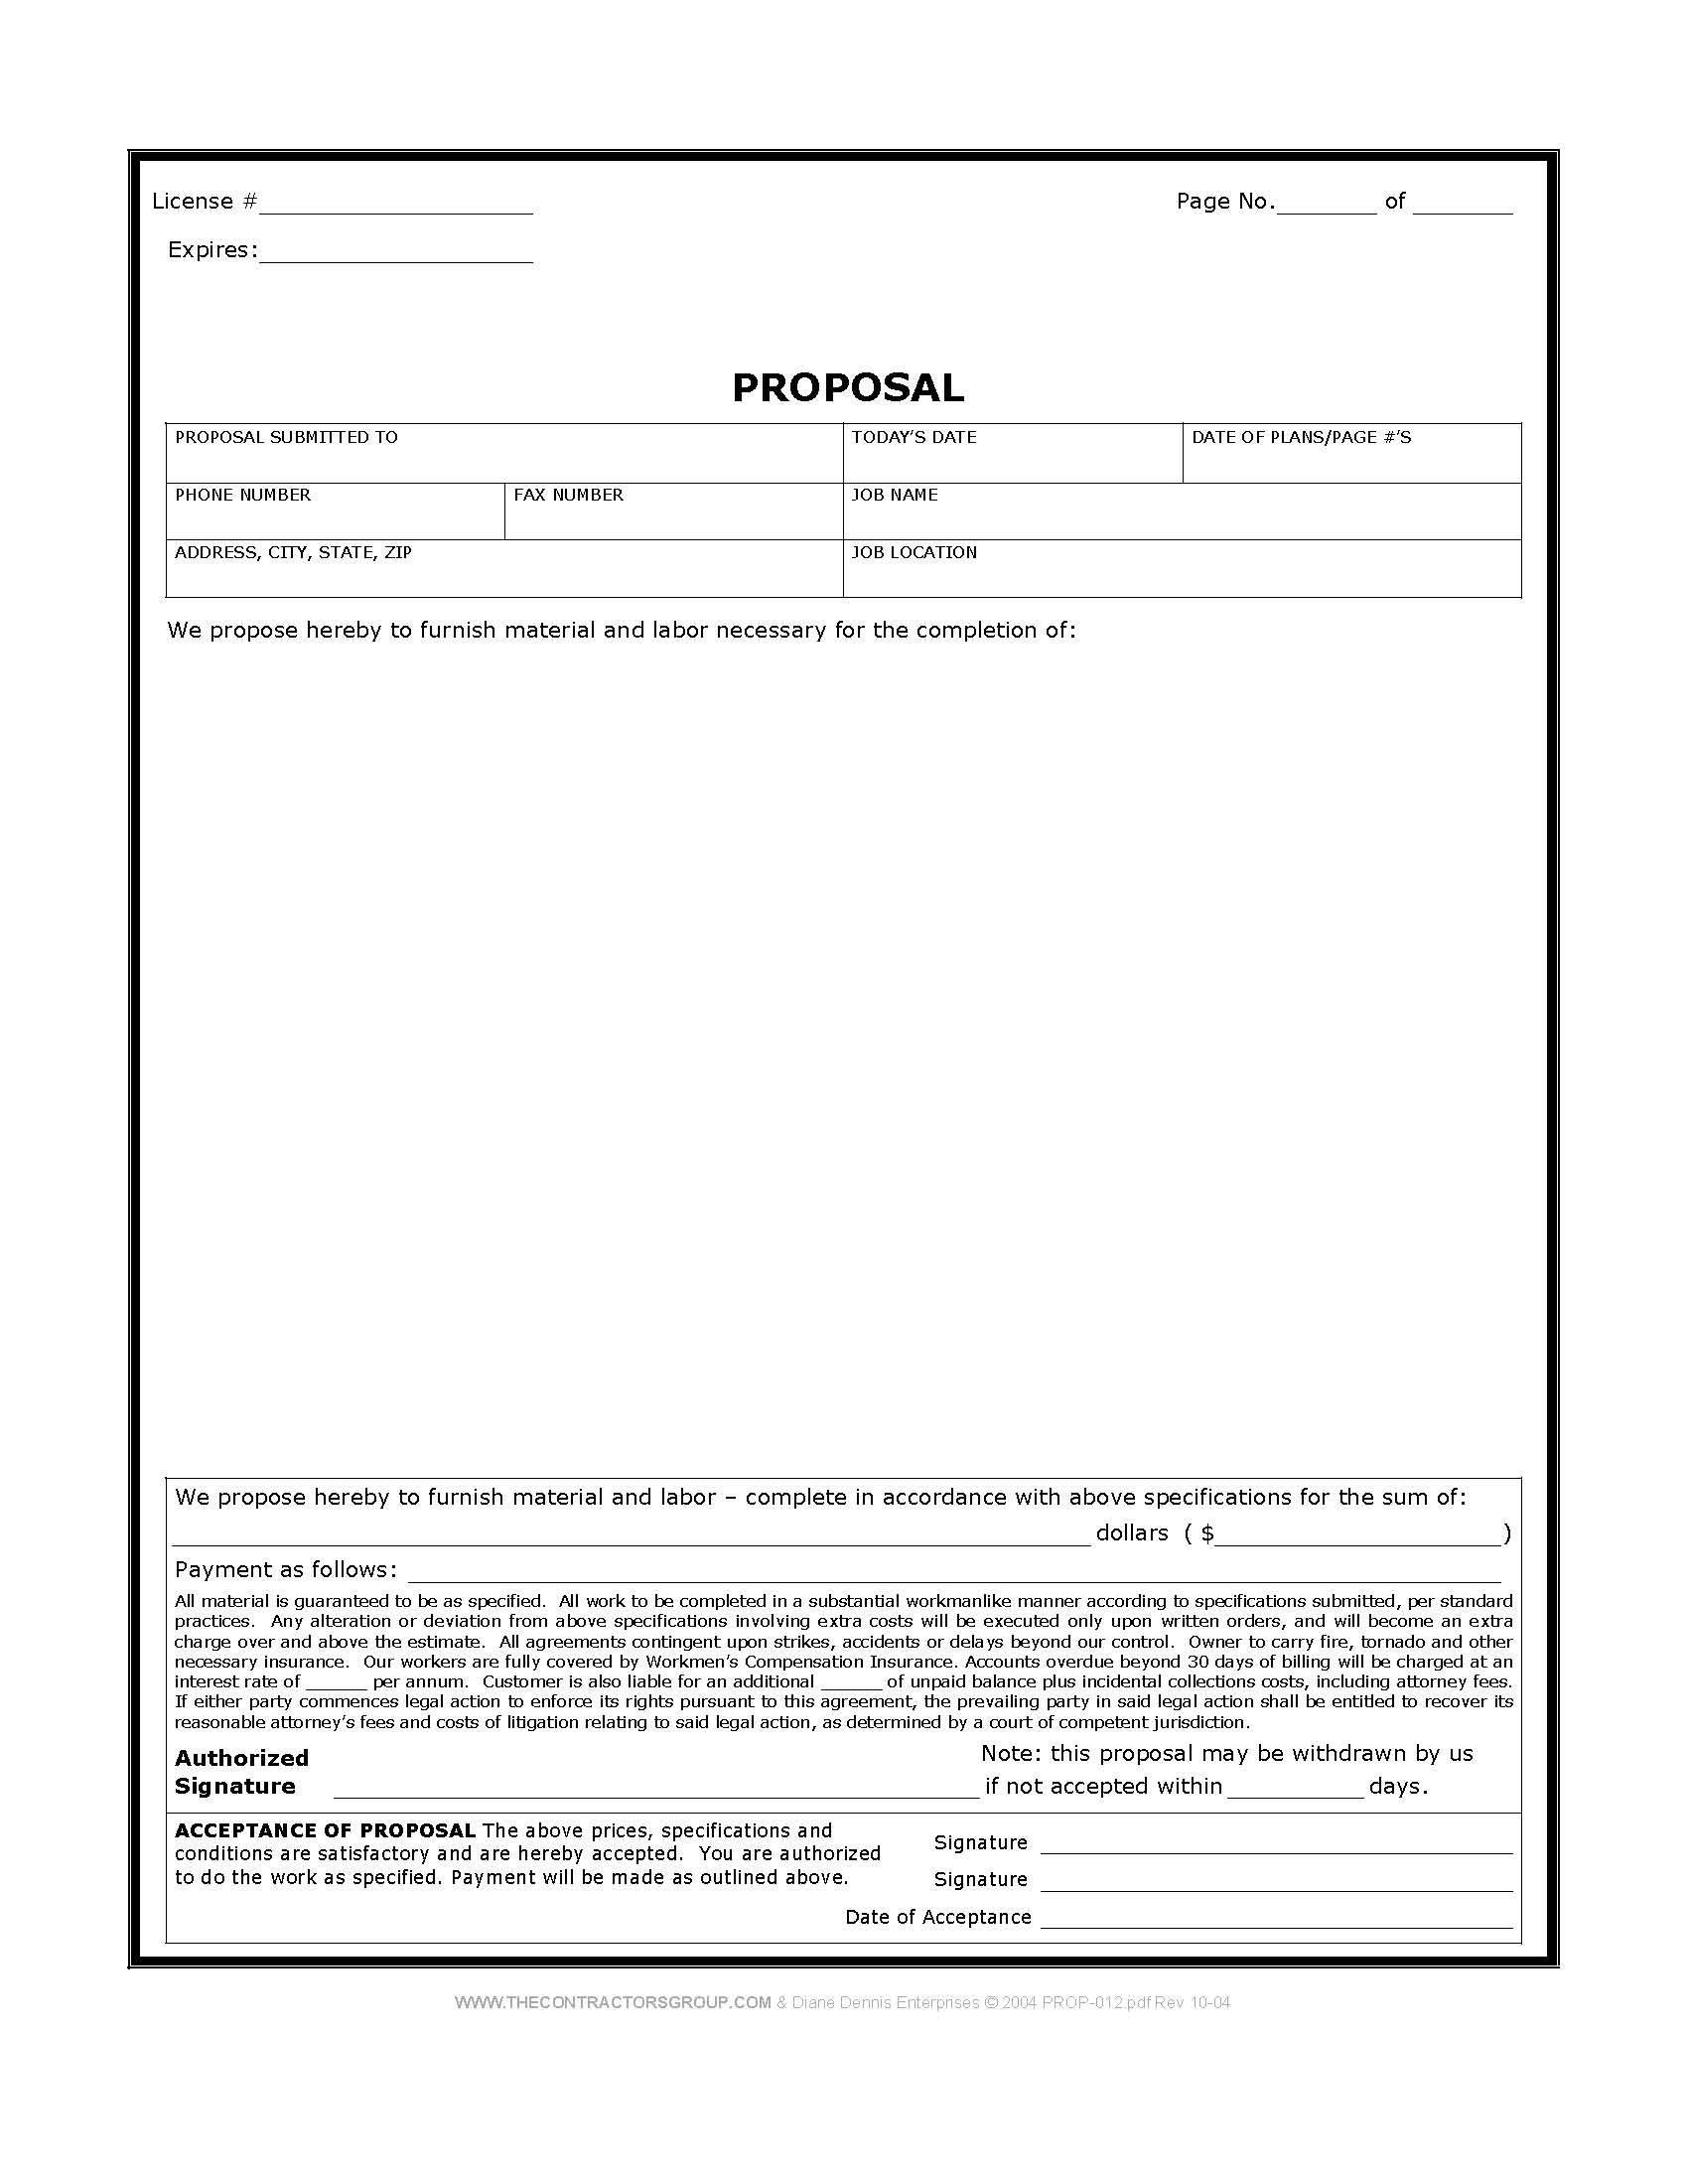 Independent Contractor Offer Letter Template - Free Print Contractor Proposal forms